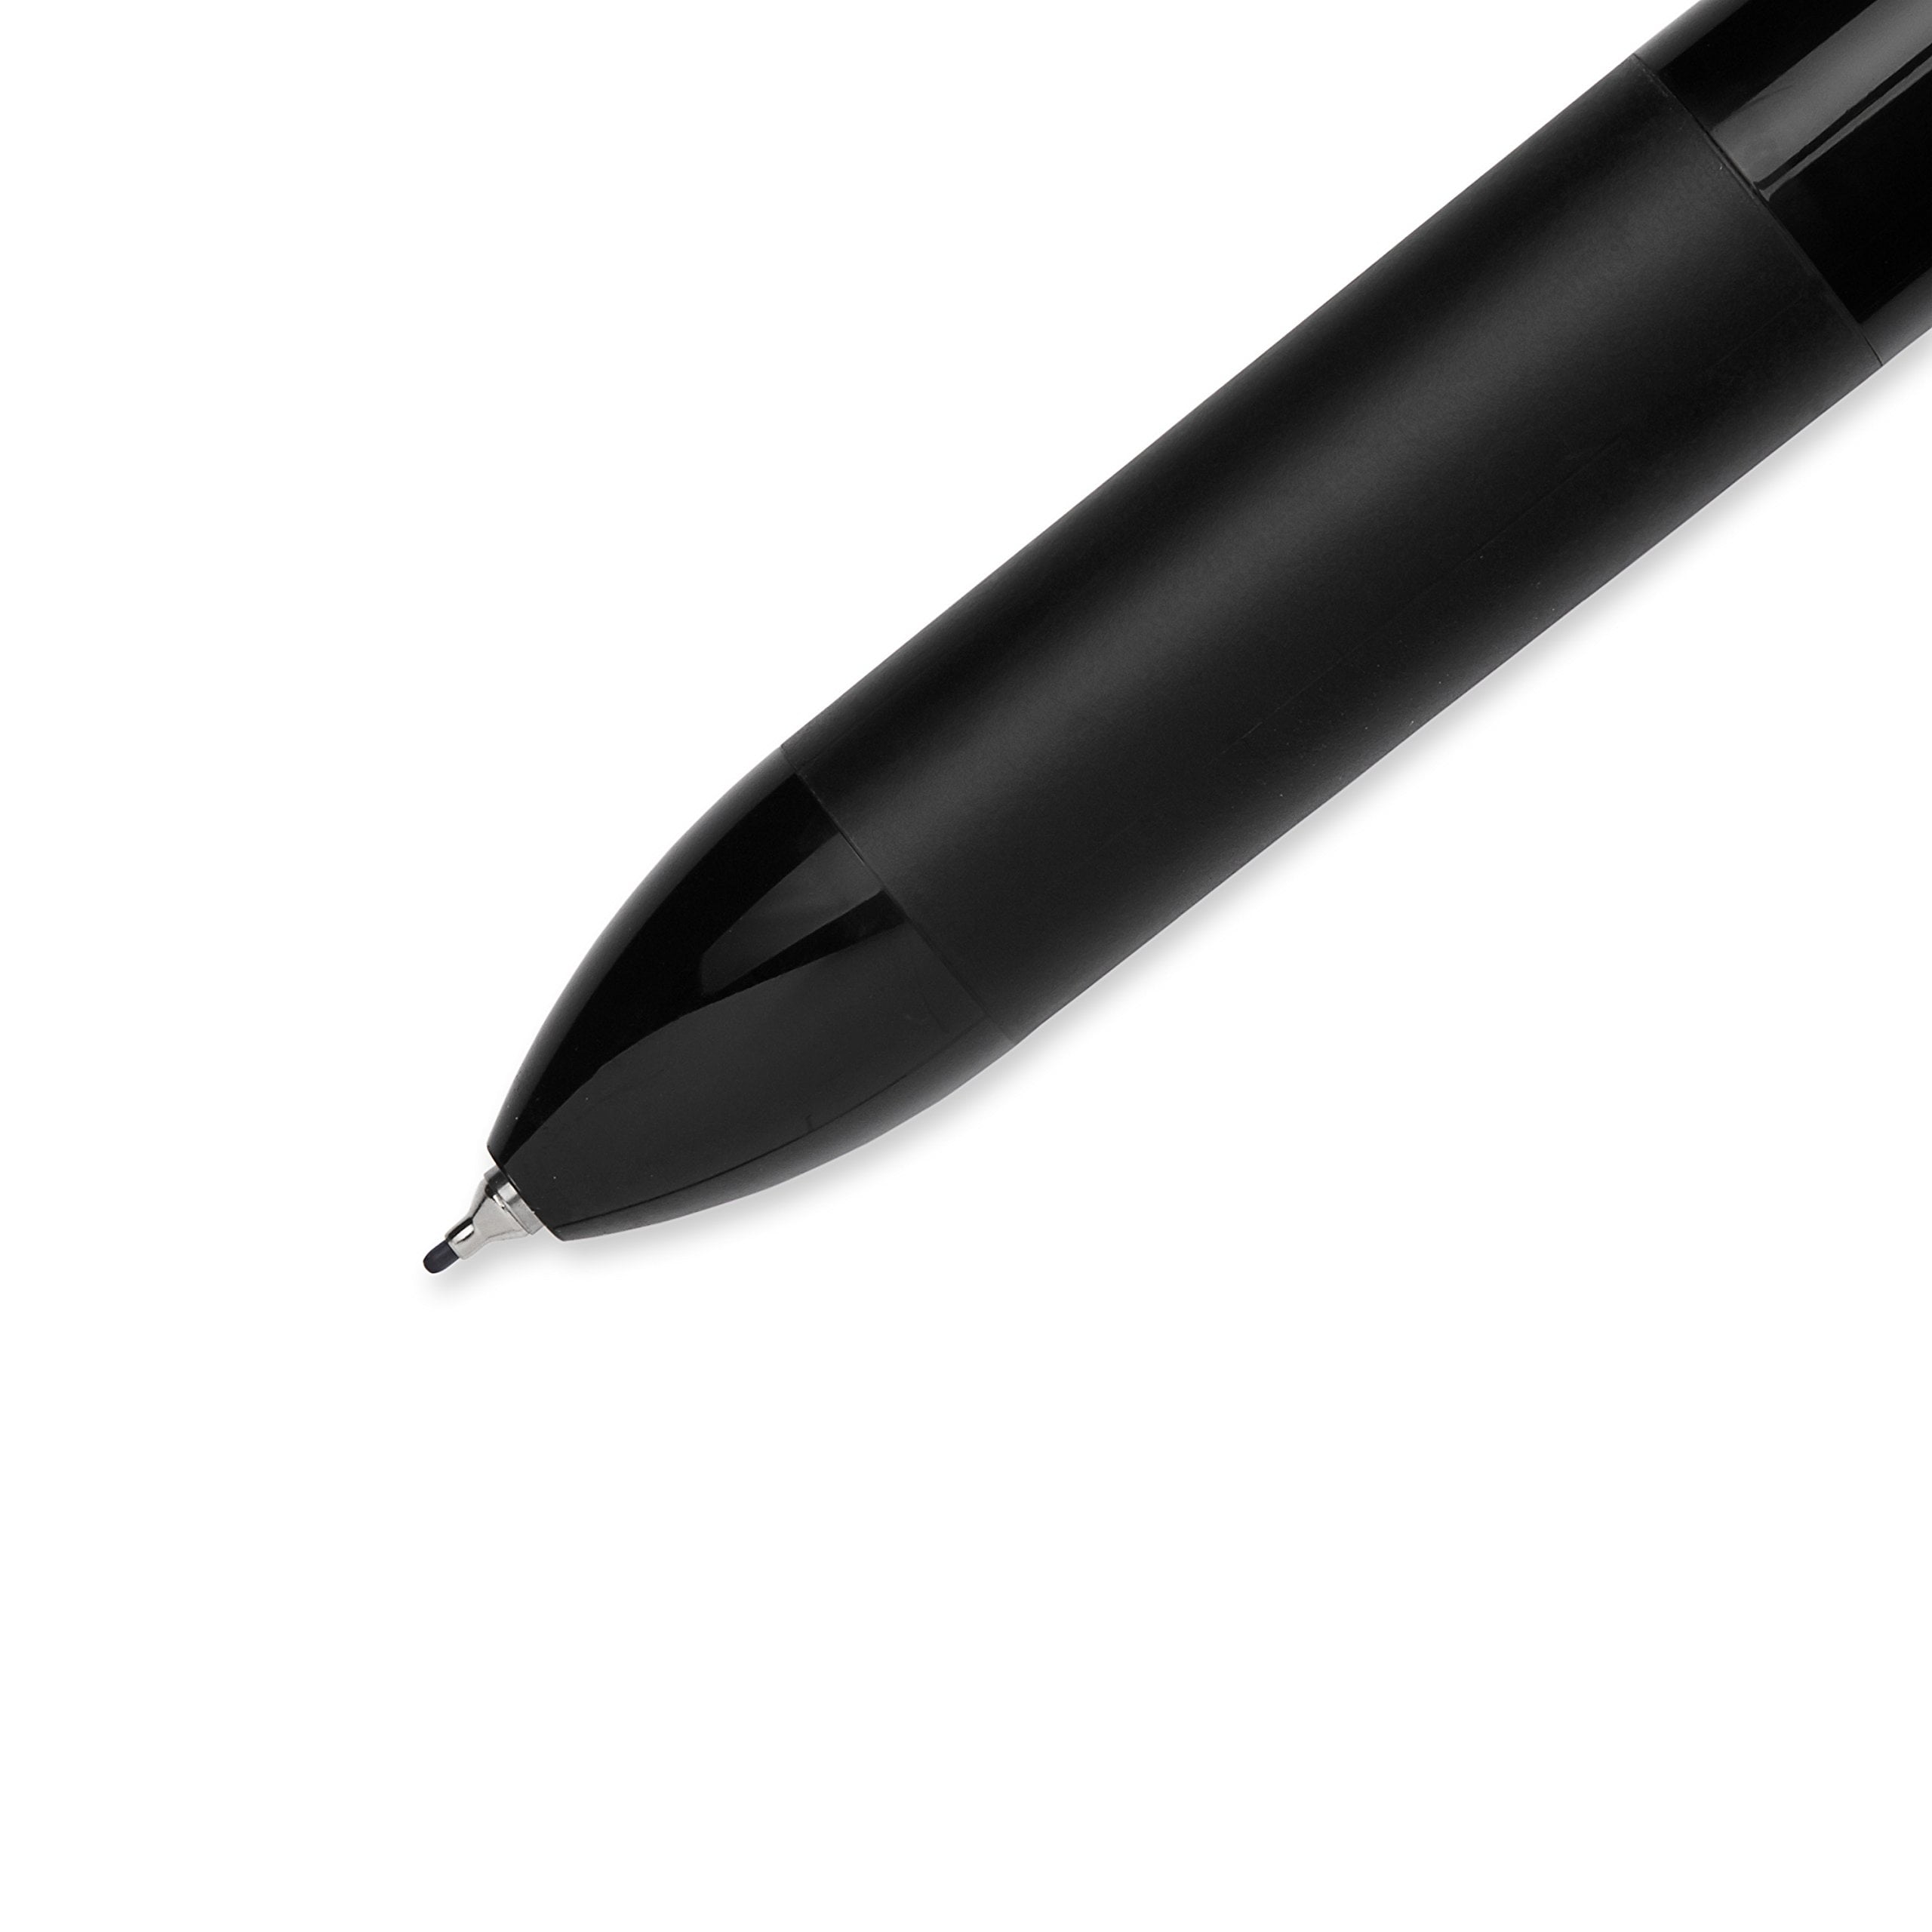 Water-Resistant Ink Porous Point Pen by Sharpie® SAN1976527